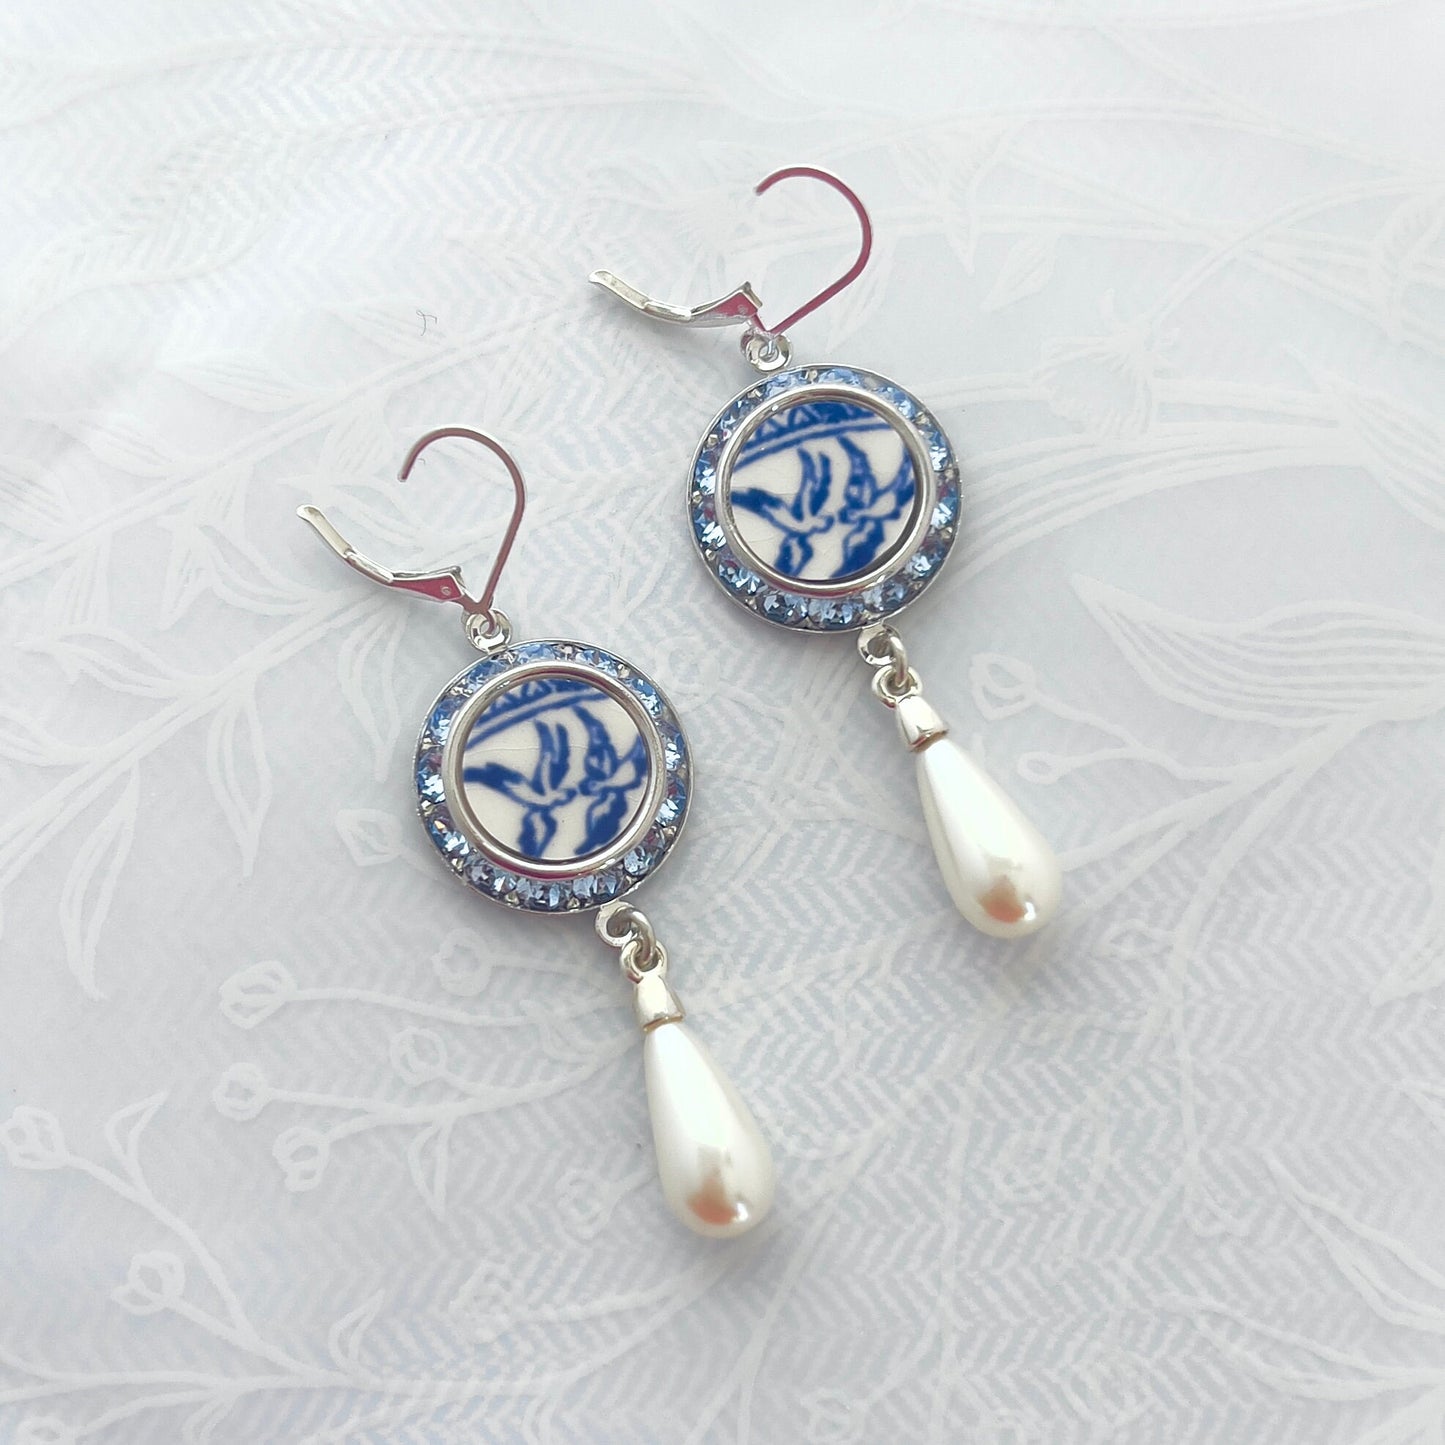 Love Birds China Earrings, 20th Wedding Anniversary Gifts, Gift for Wife, Crystal and Pearl Broken China Jewelry